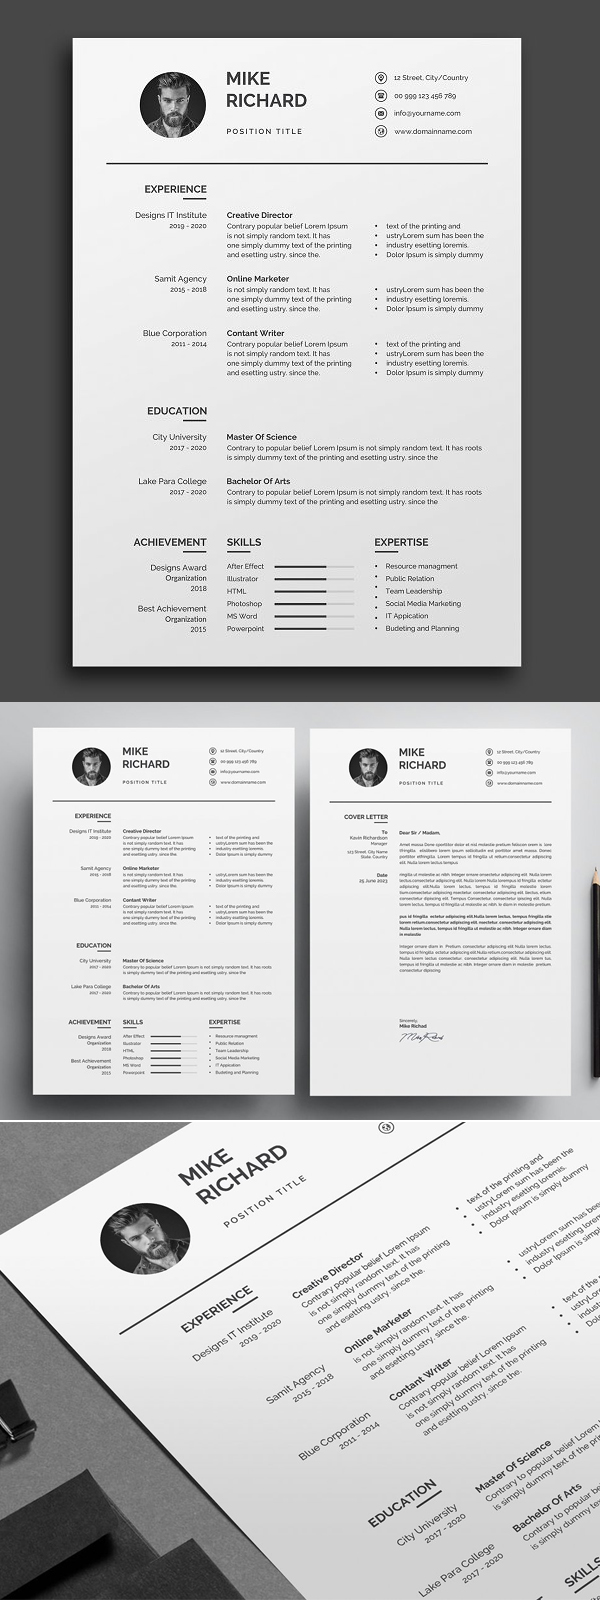 50 Most Popular Resume Templates Of 2022 - 26